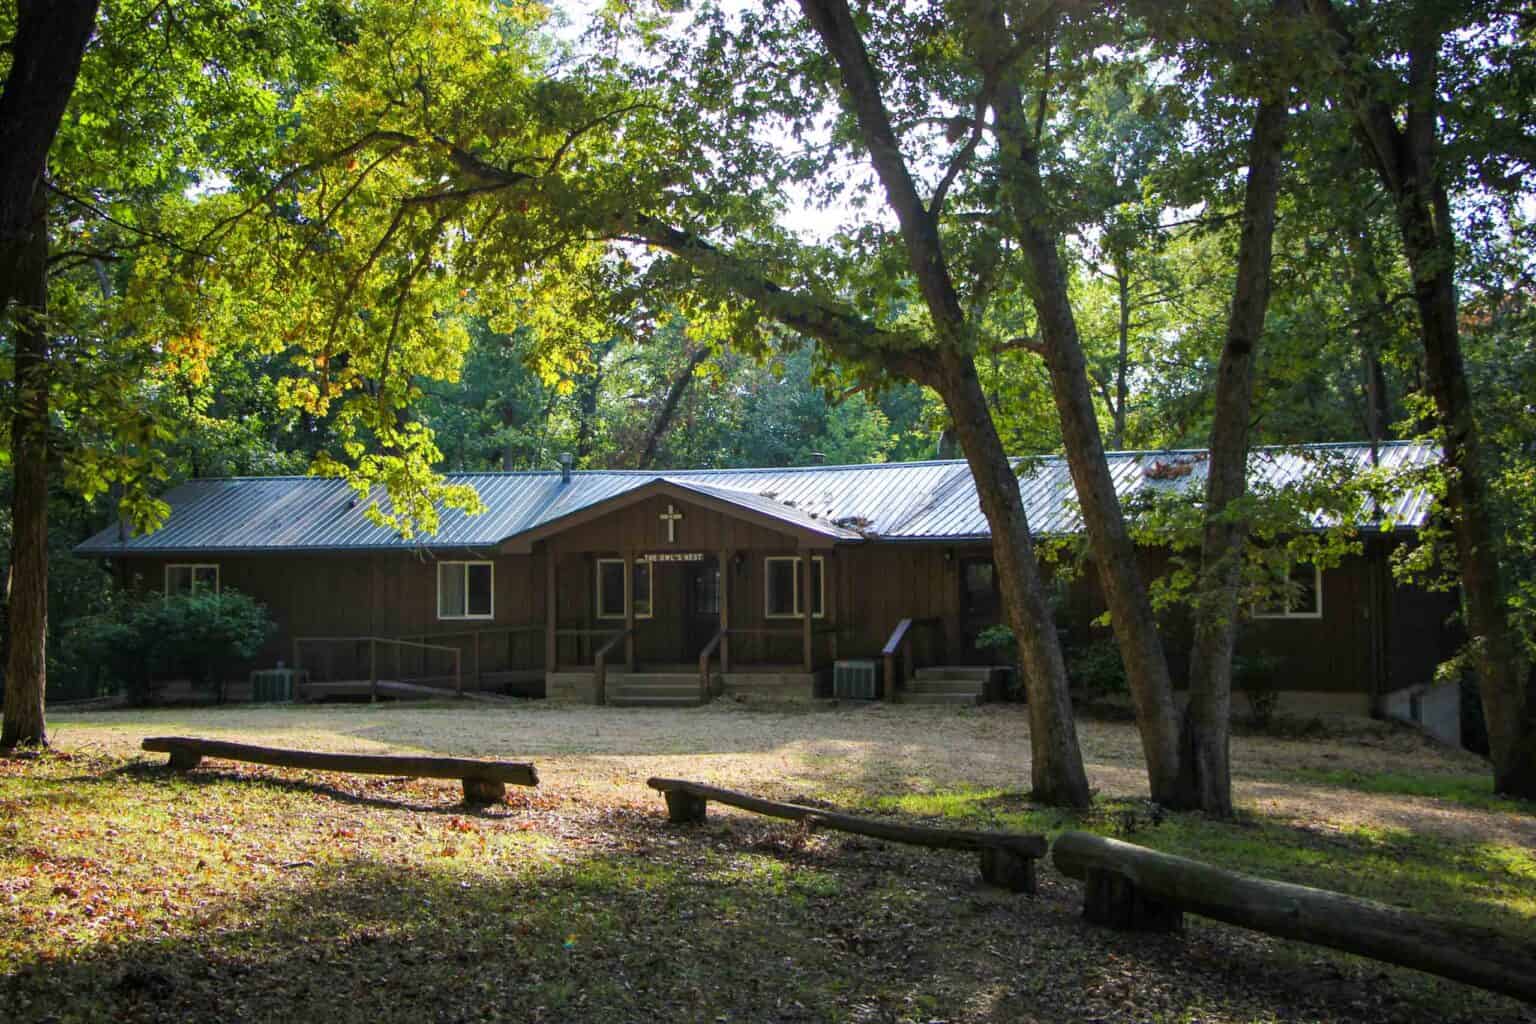 A small summer camp cabin in the woods of Iowa.